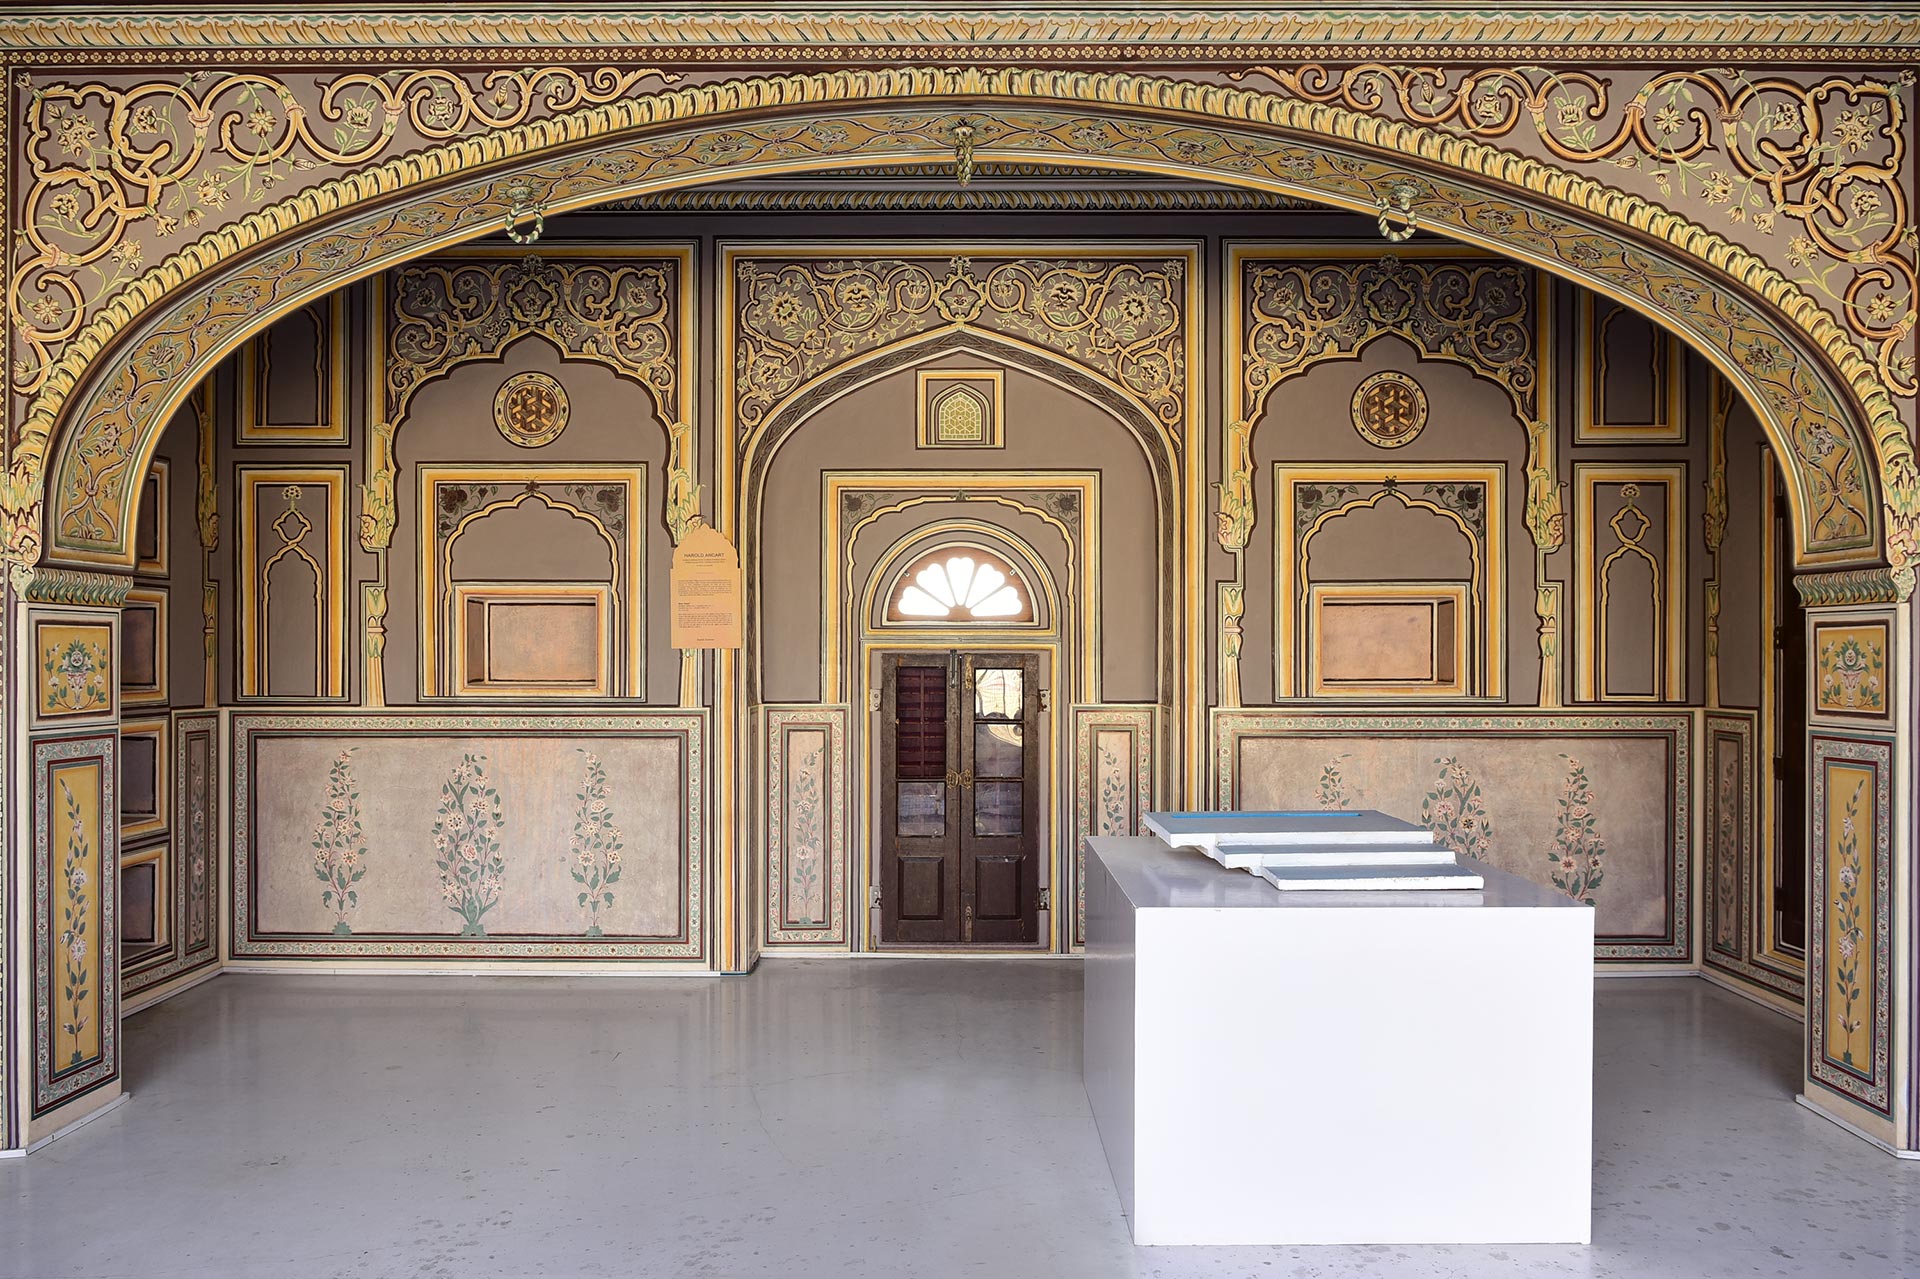 Installation view of the 2019 exhibition at The Sculpture Park at Madhavendra Palace in Jaipur, India, dated 2019.